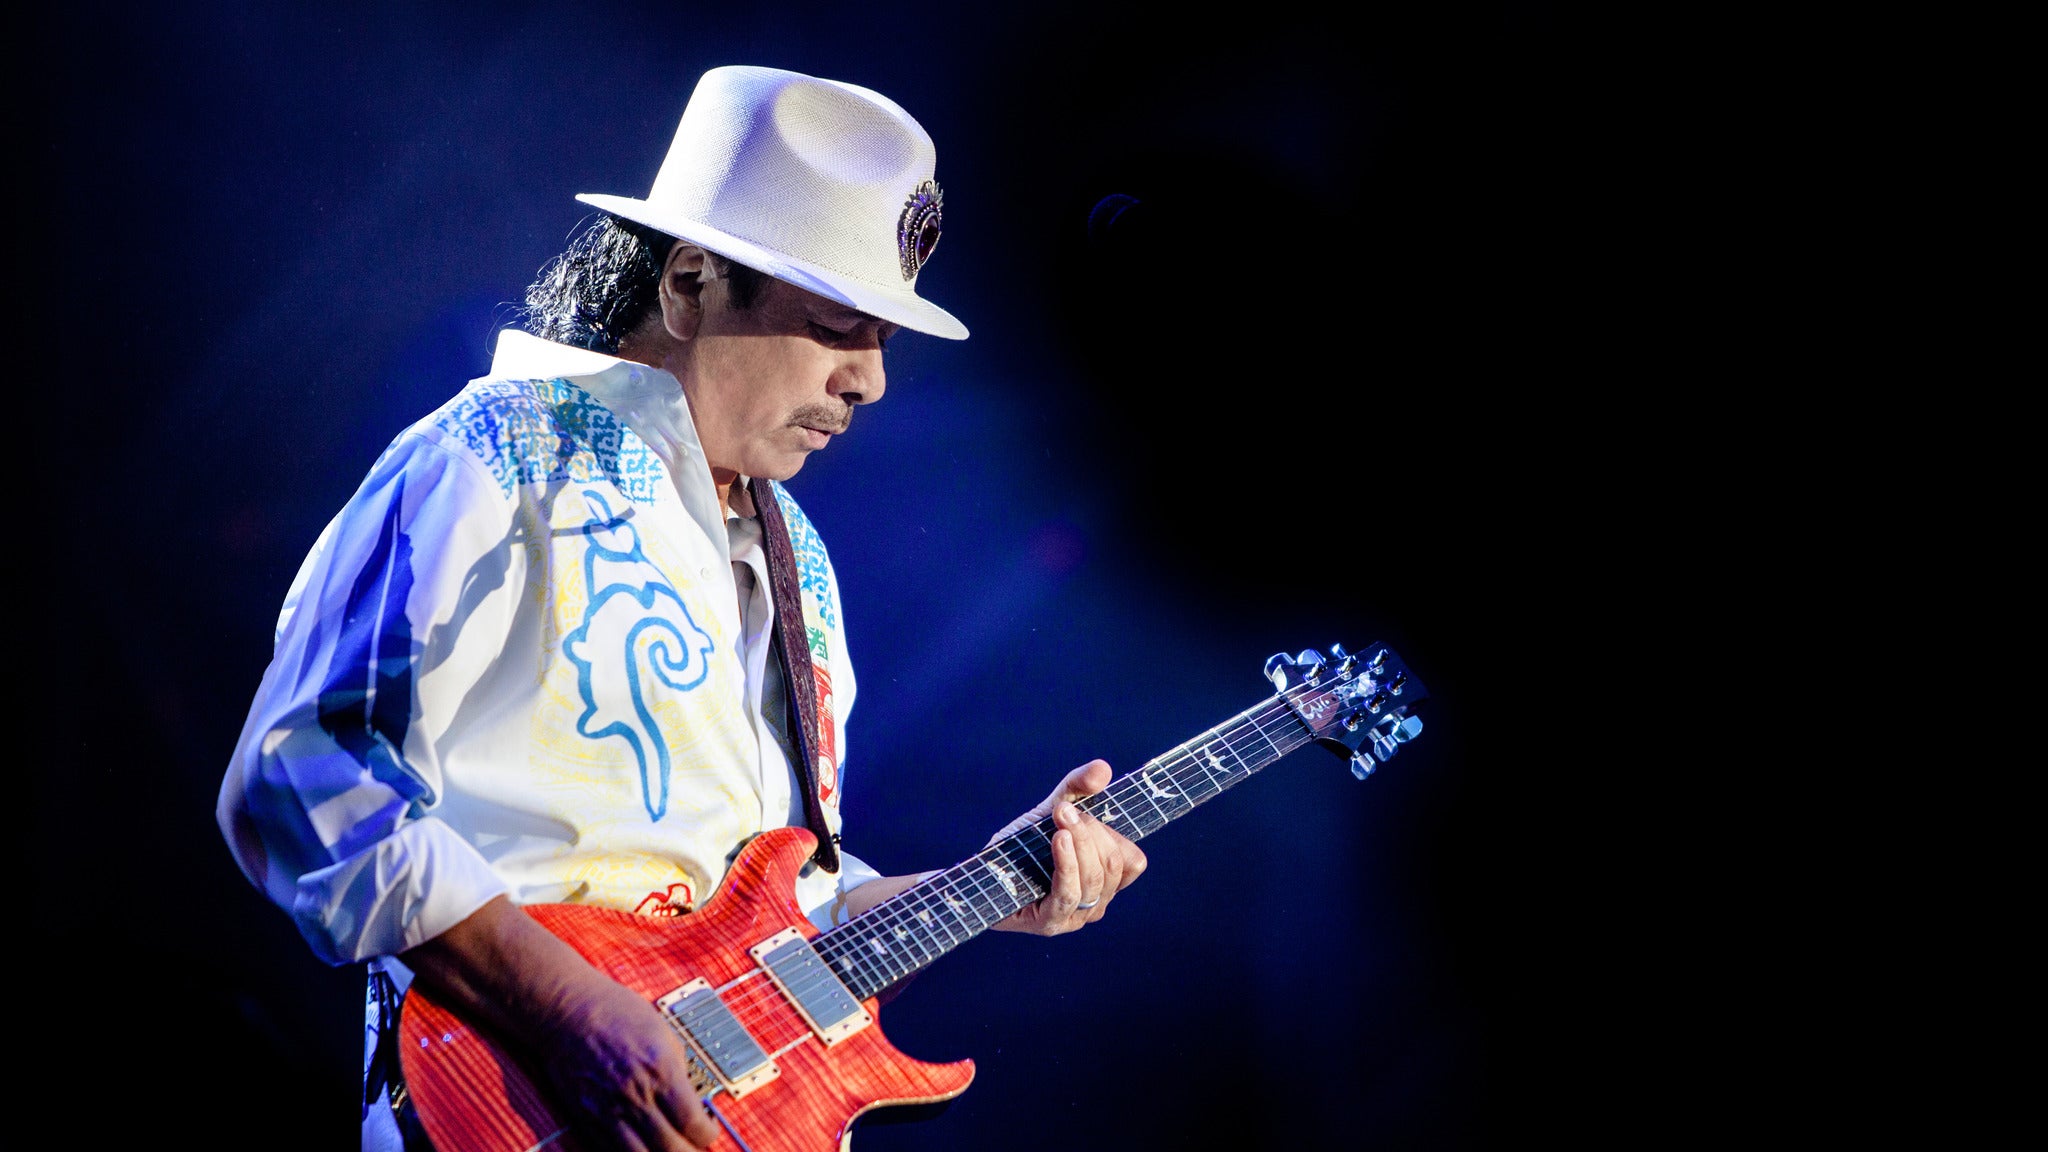 SiriusXM Presents An Intimate Evening with SANTANA Greatest Hits Live